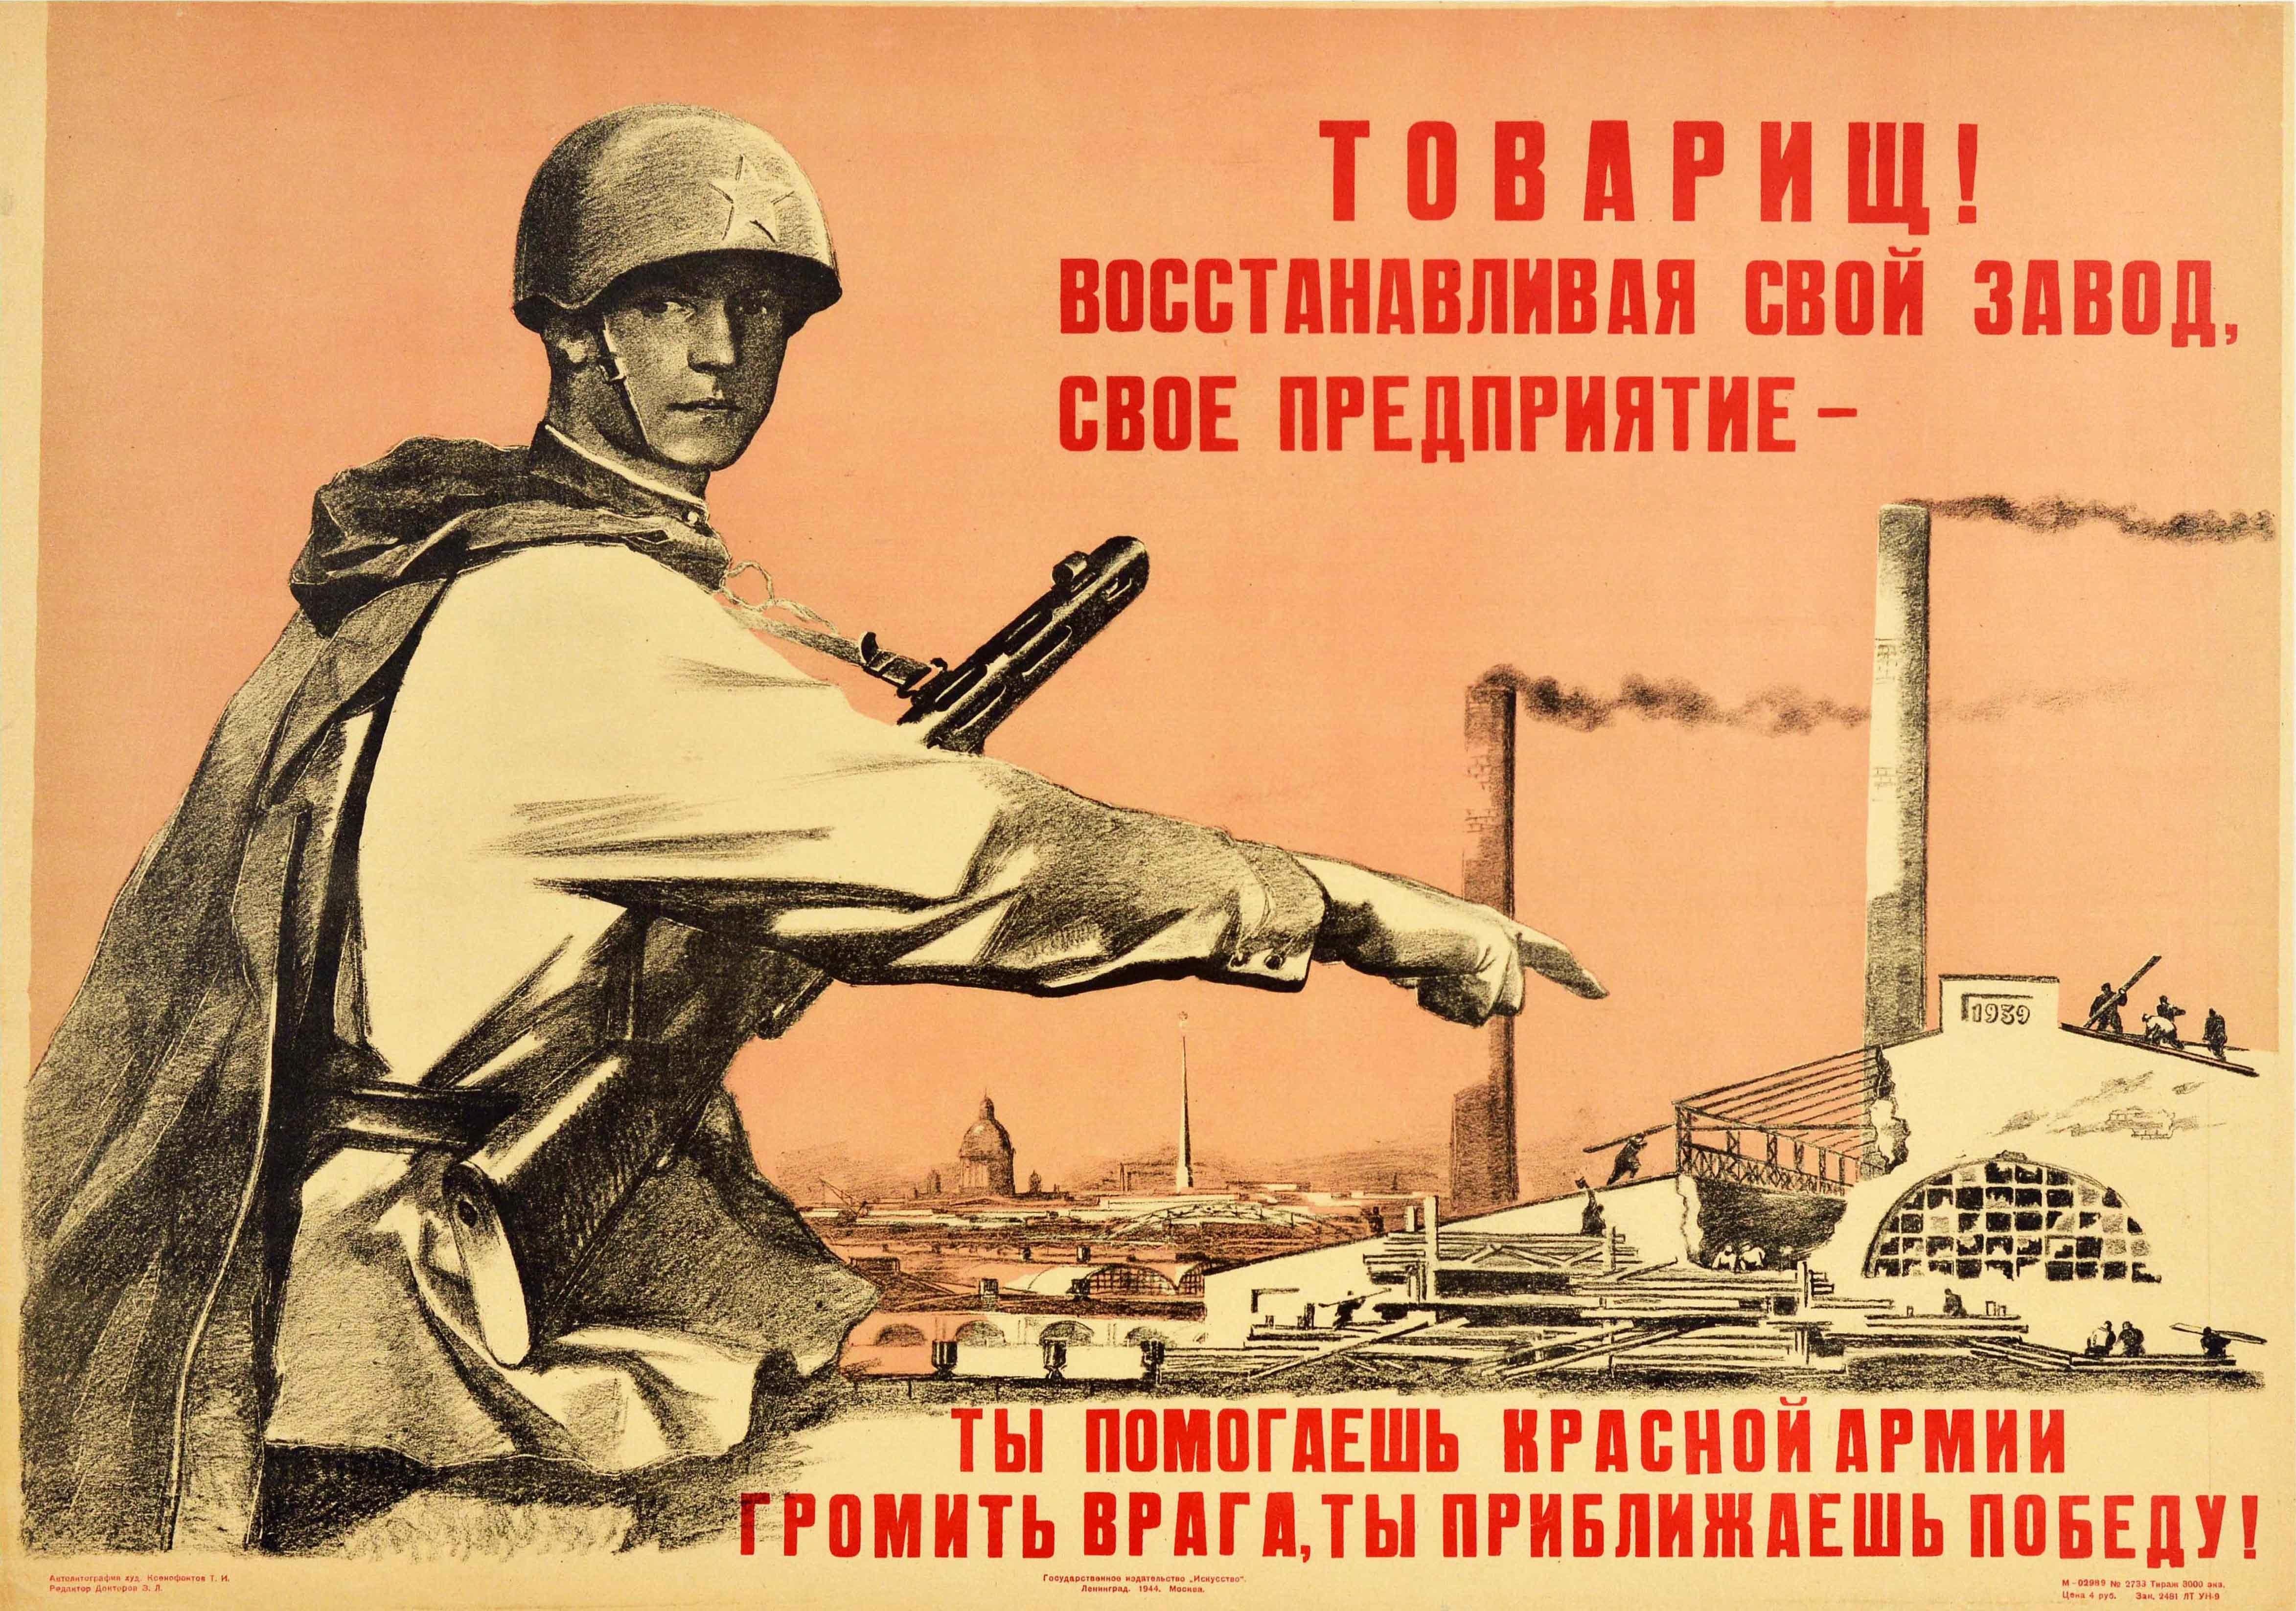 T. Ksenofontov Print - Original Vintage Poster WWII Factories Industry Reconstruction Red Army Victory